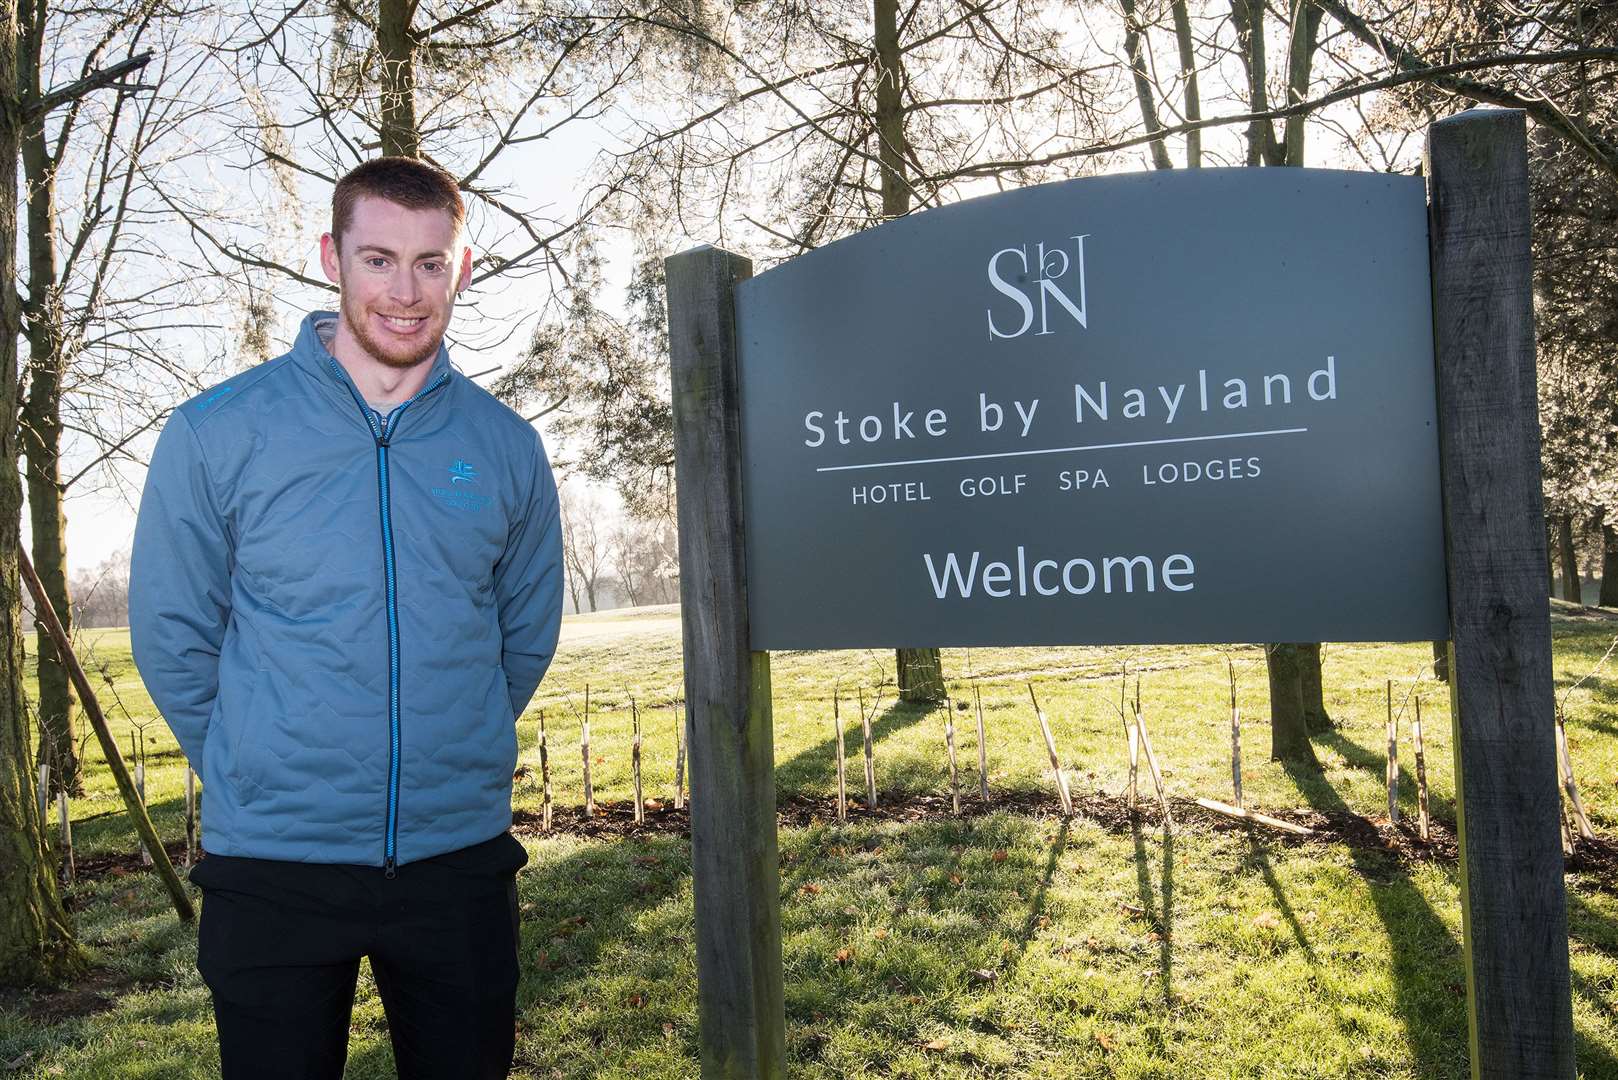 59club Spotlight on Service as told by Karl Hepple of Stoke by Nayland￼